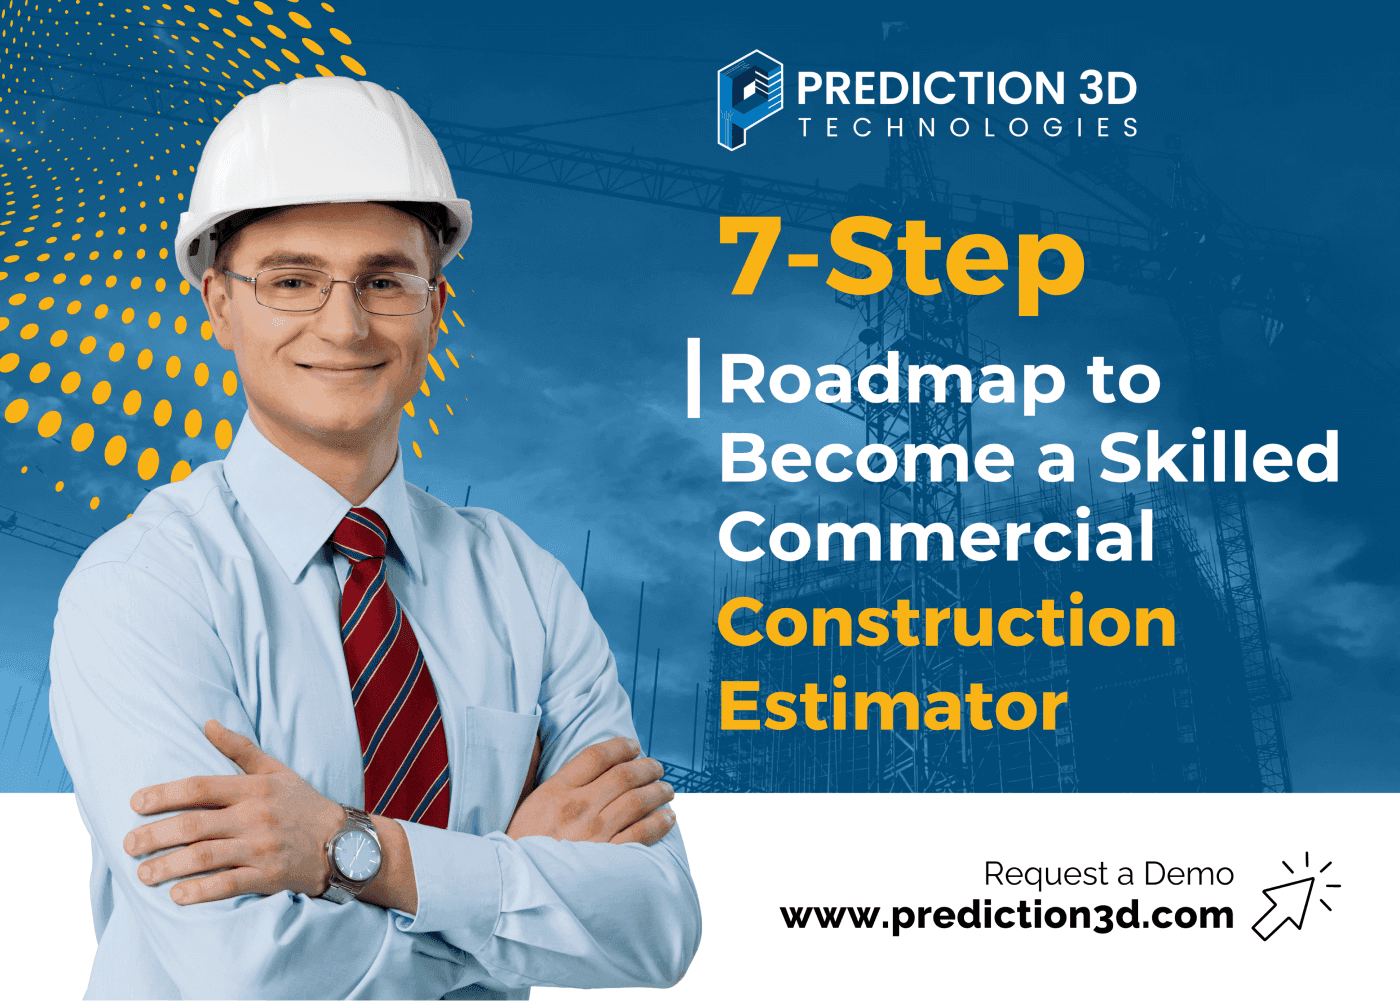 7-step roadmap to become a skilled commercial construction estimator